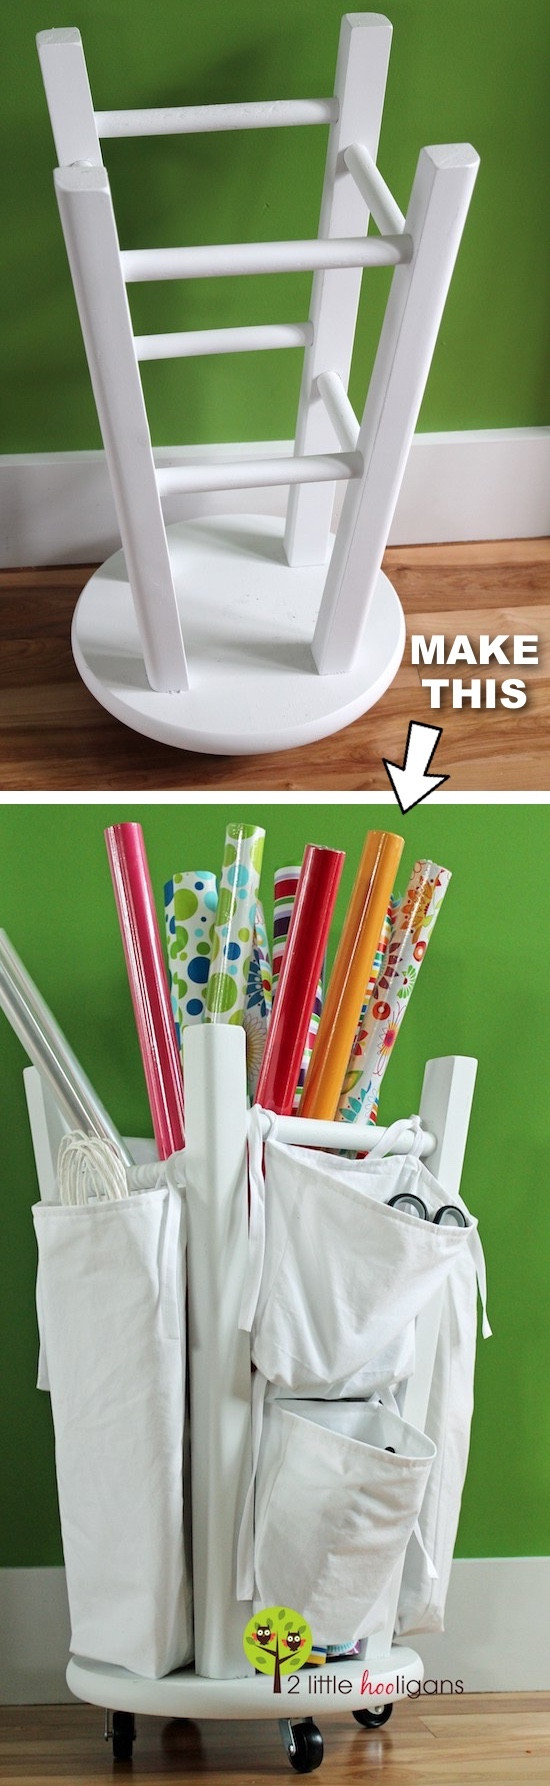 Easy Paper Crafts For Adults
 Easy DIY Craft Ideas That Will Spark Your Creativity for